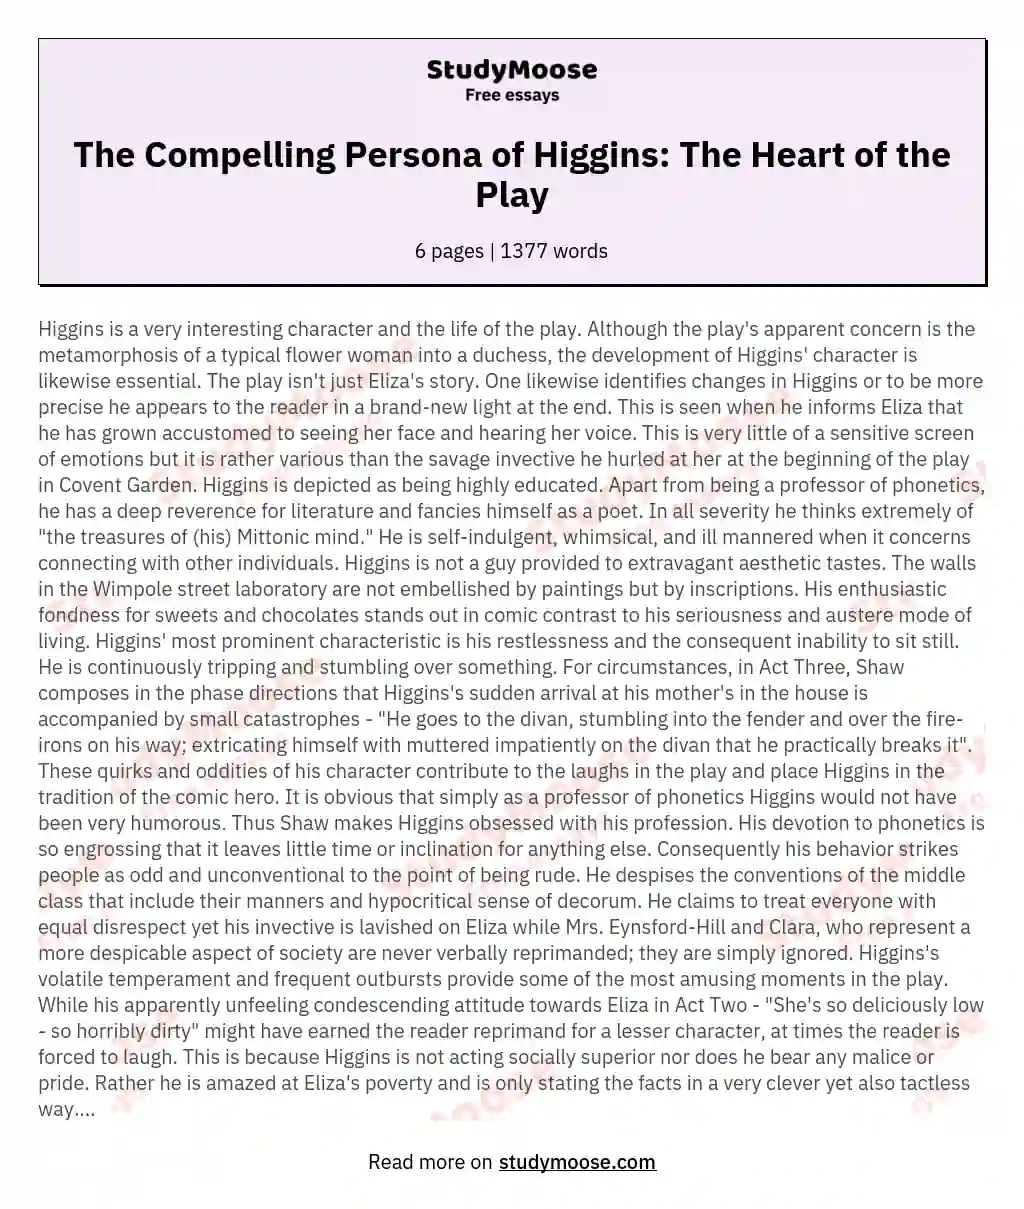 The Compelling Persona of Higgins: The Heart of the Play essay